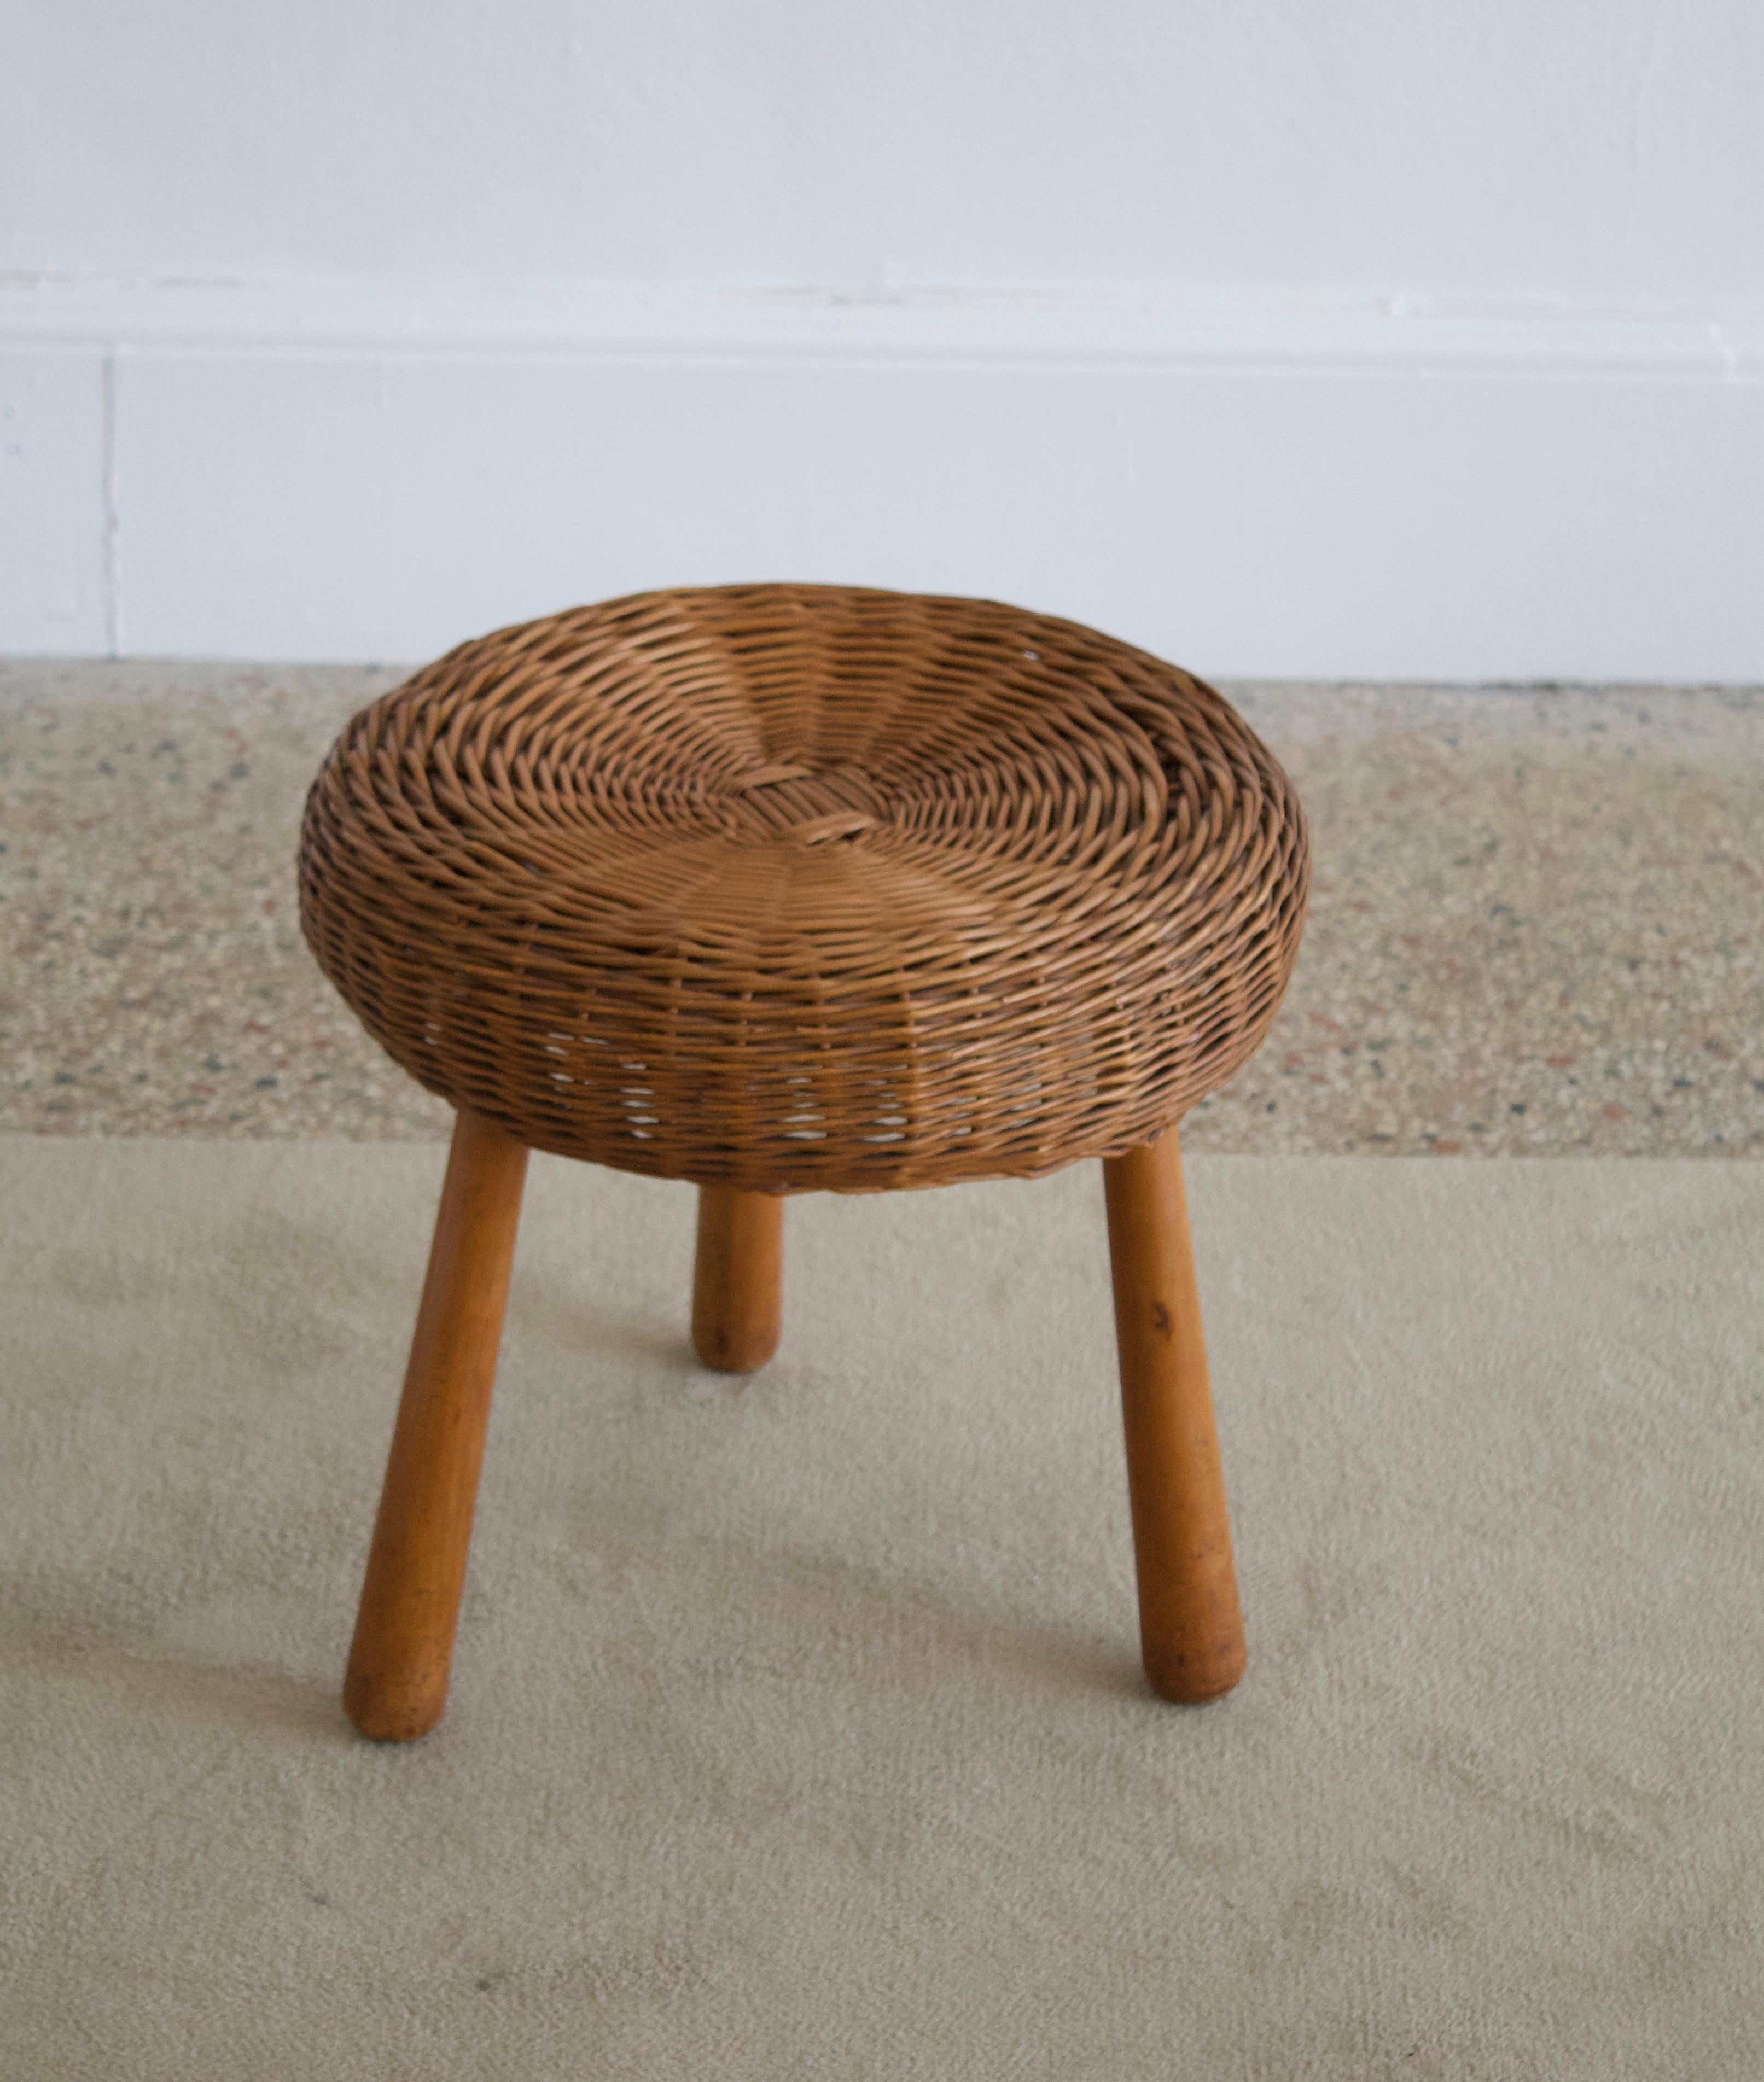 A stool, design attributed to Tony Paul. Features an interesting mix of rattan and finely carved solid wood.

Other designers of the period include Charlotte Perriand, Pierre Chapo, Isamu Noguchi, Eero Arnio, and Sori Yanagi.